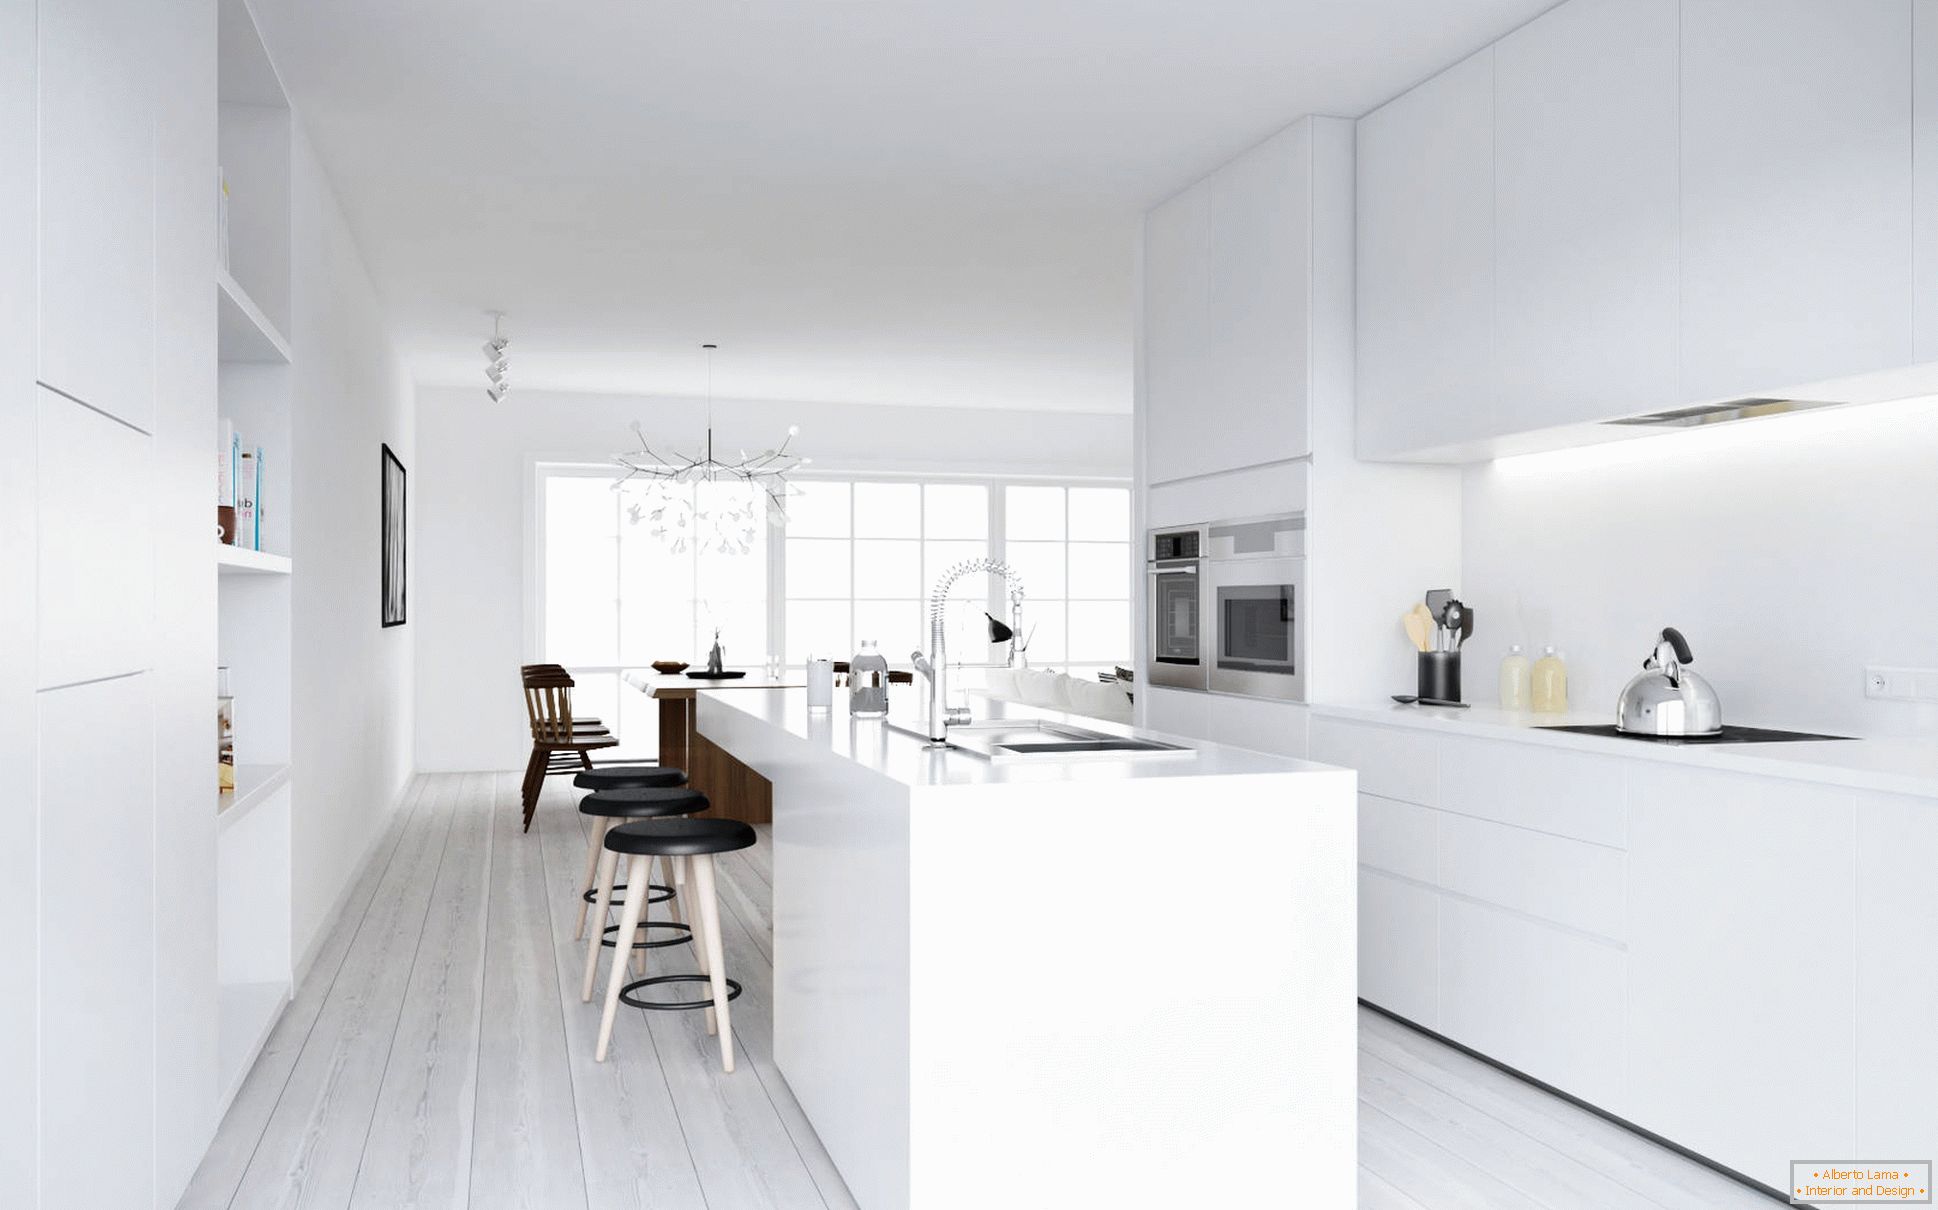 White floors in the kitchen